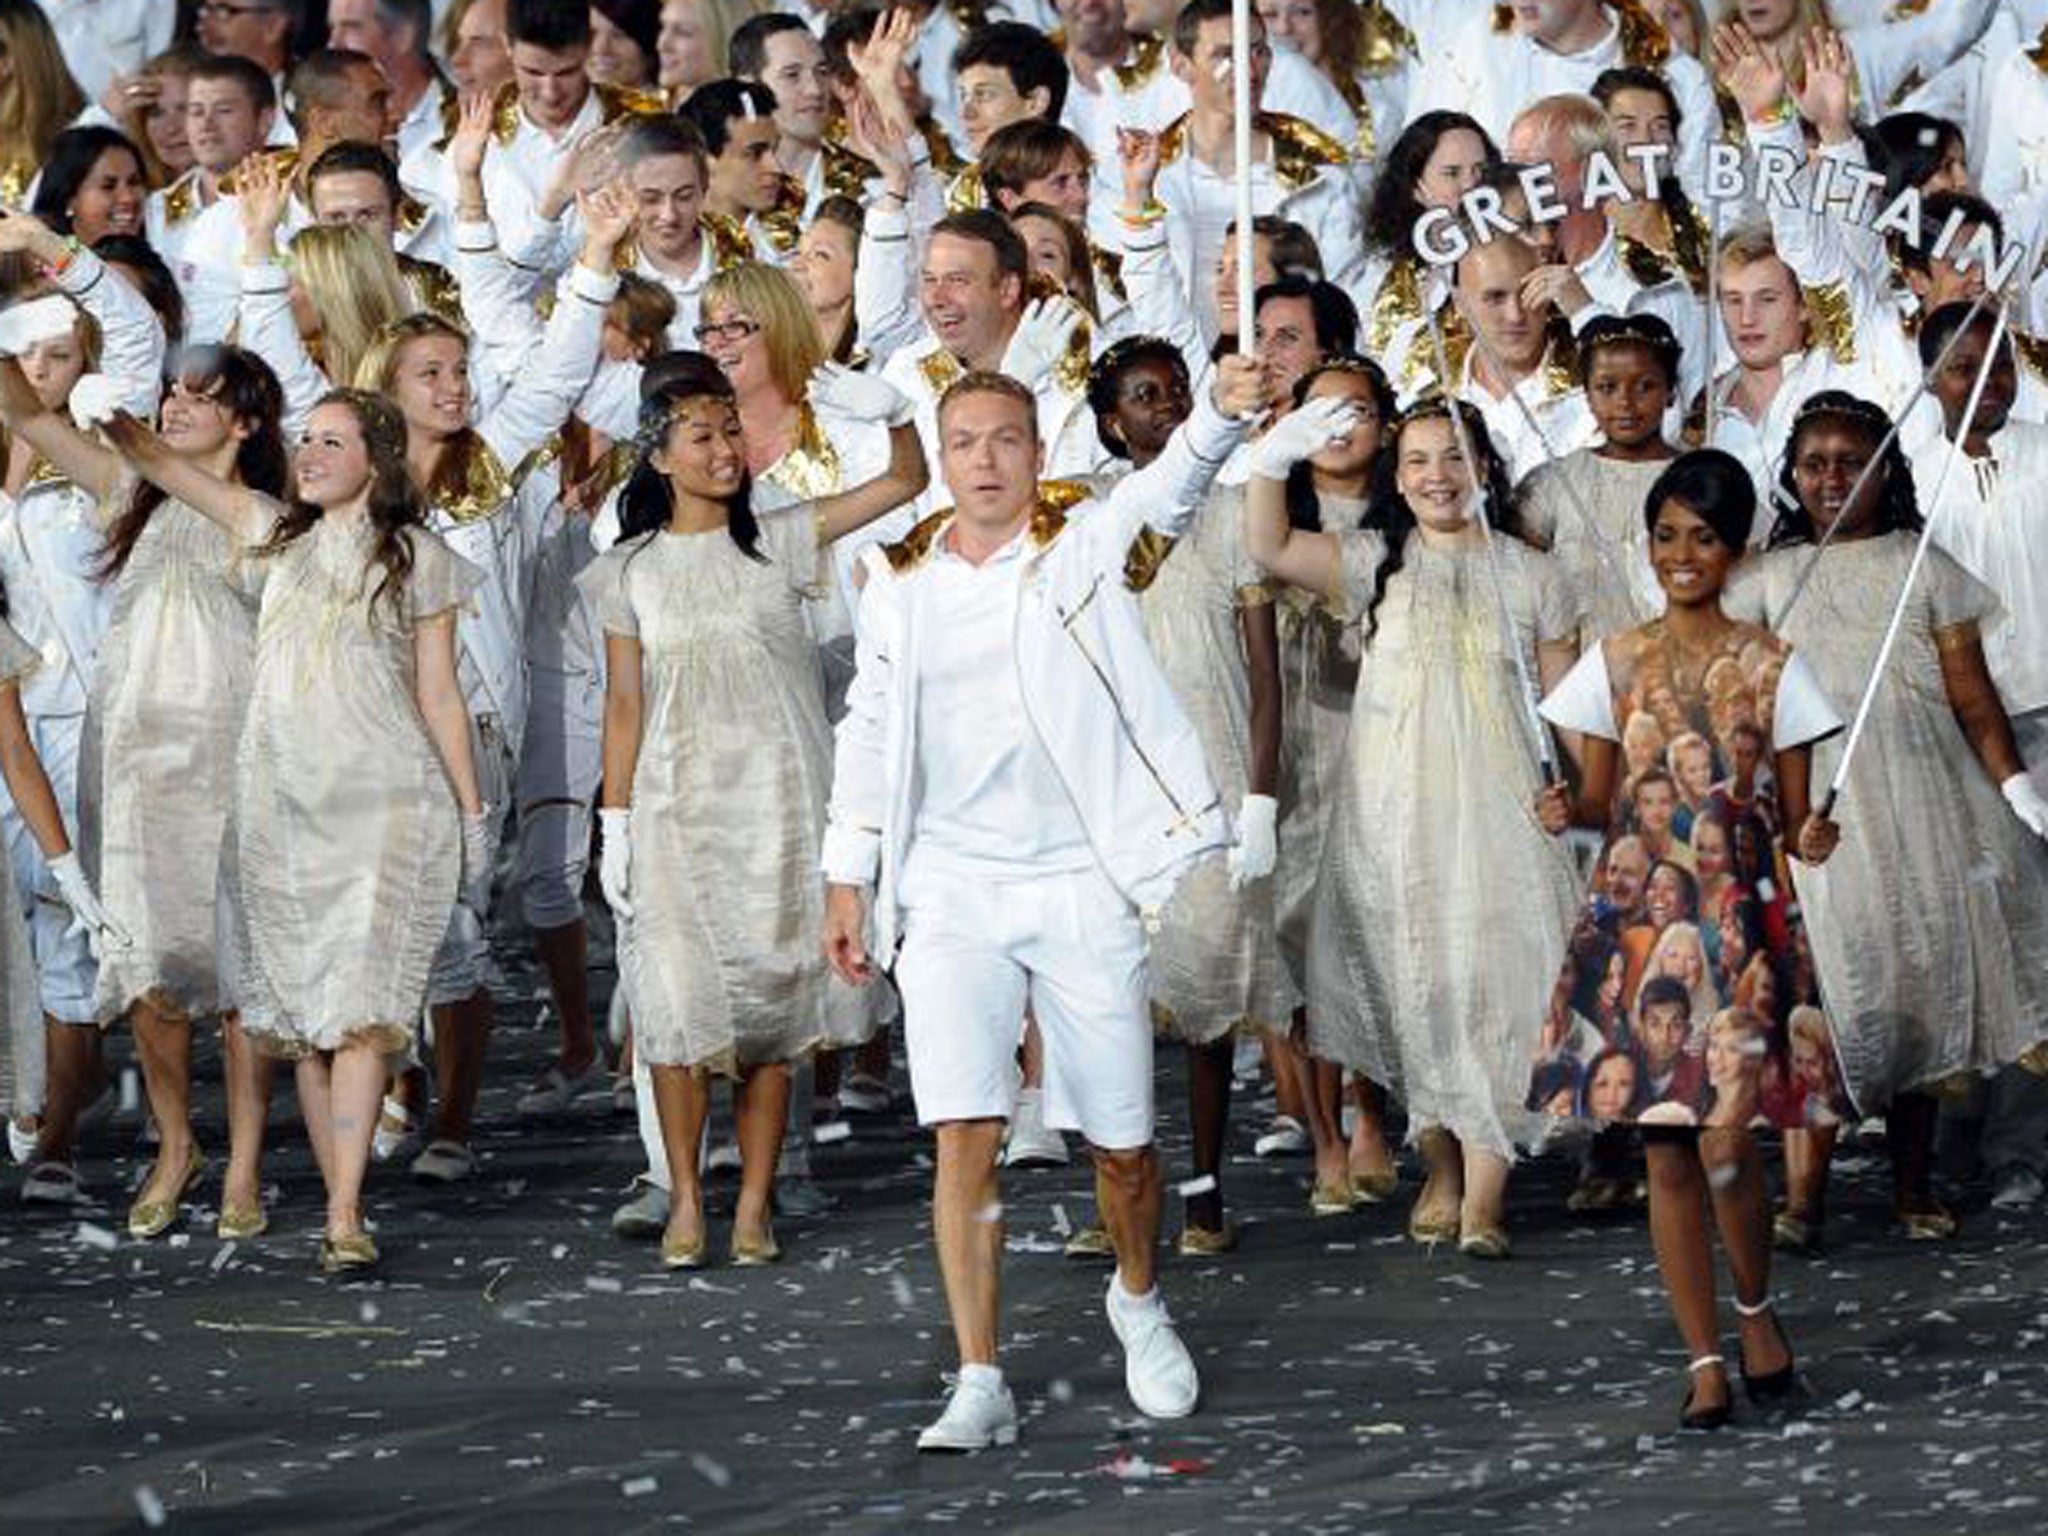 Sir Chris Hoy leads out Britain’s Olympic team at the opening ceremony